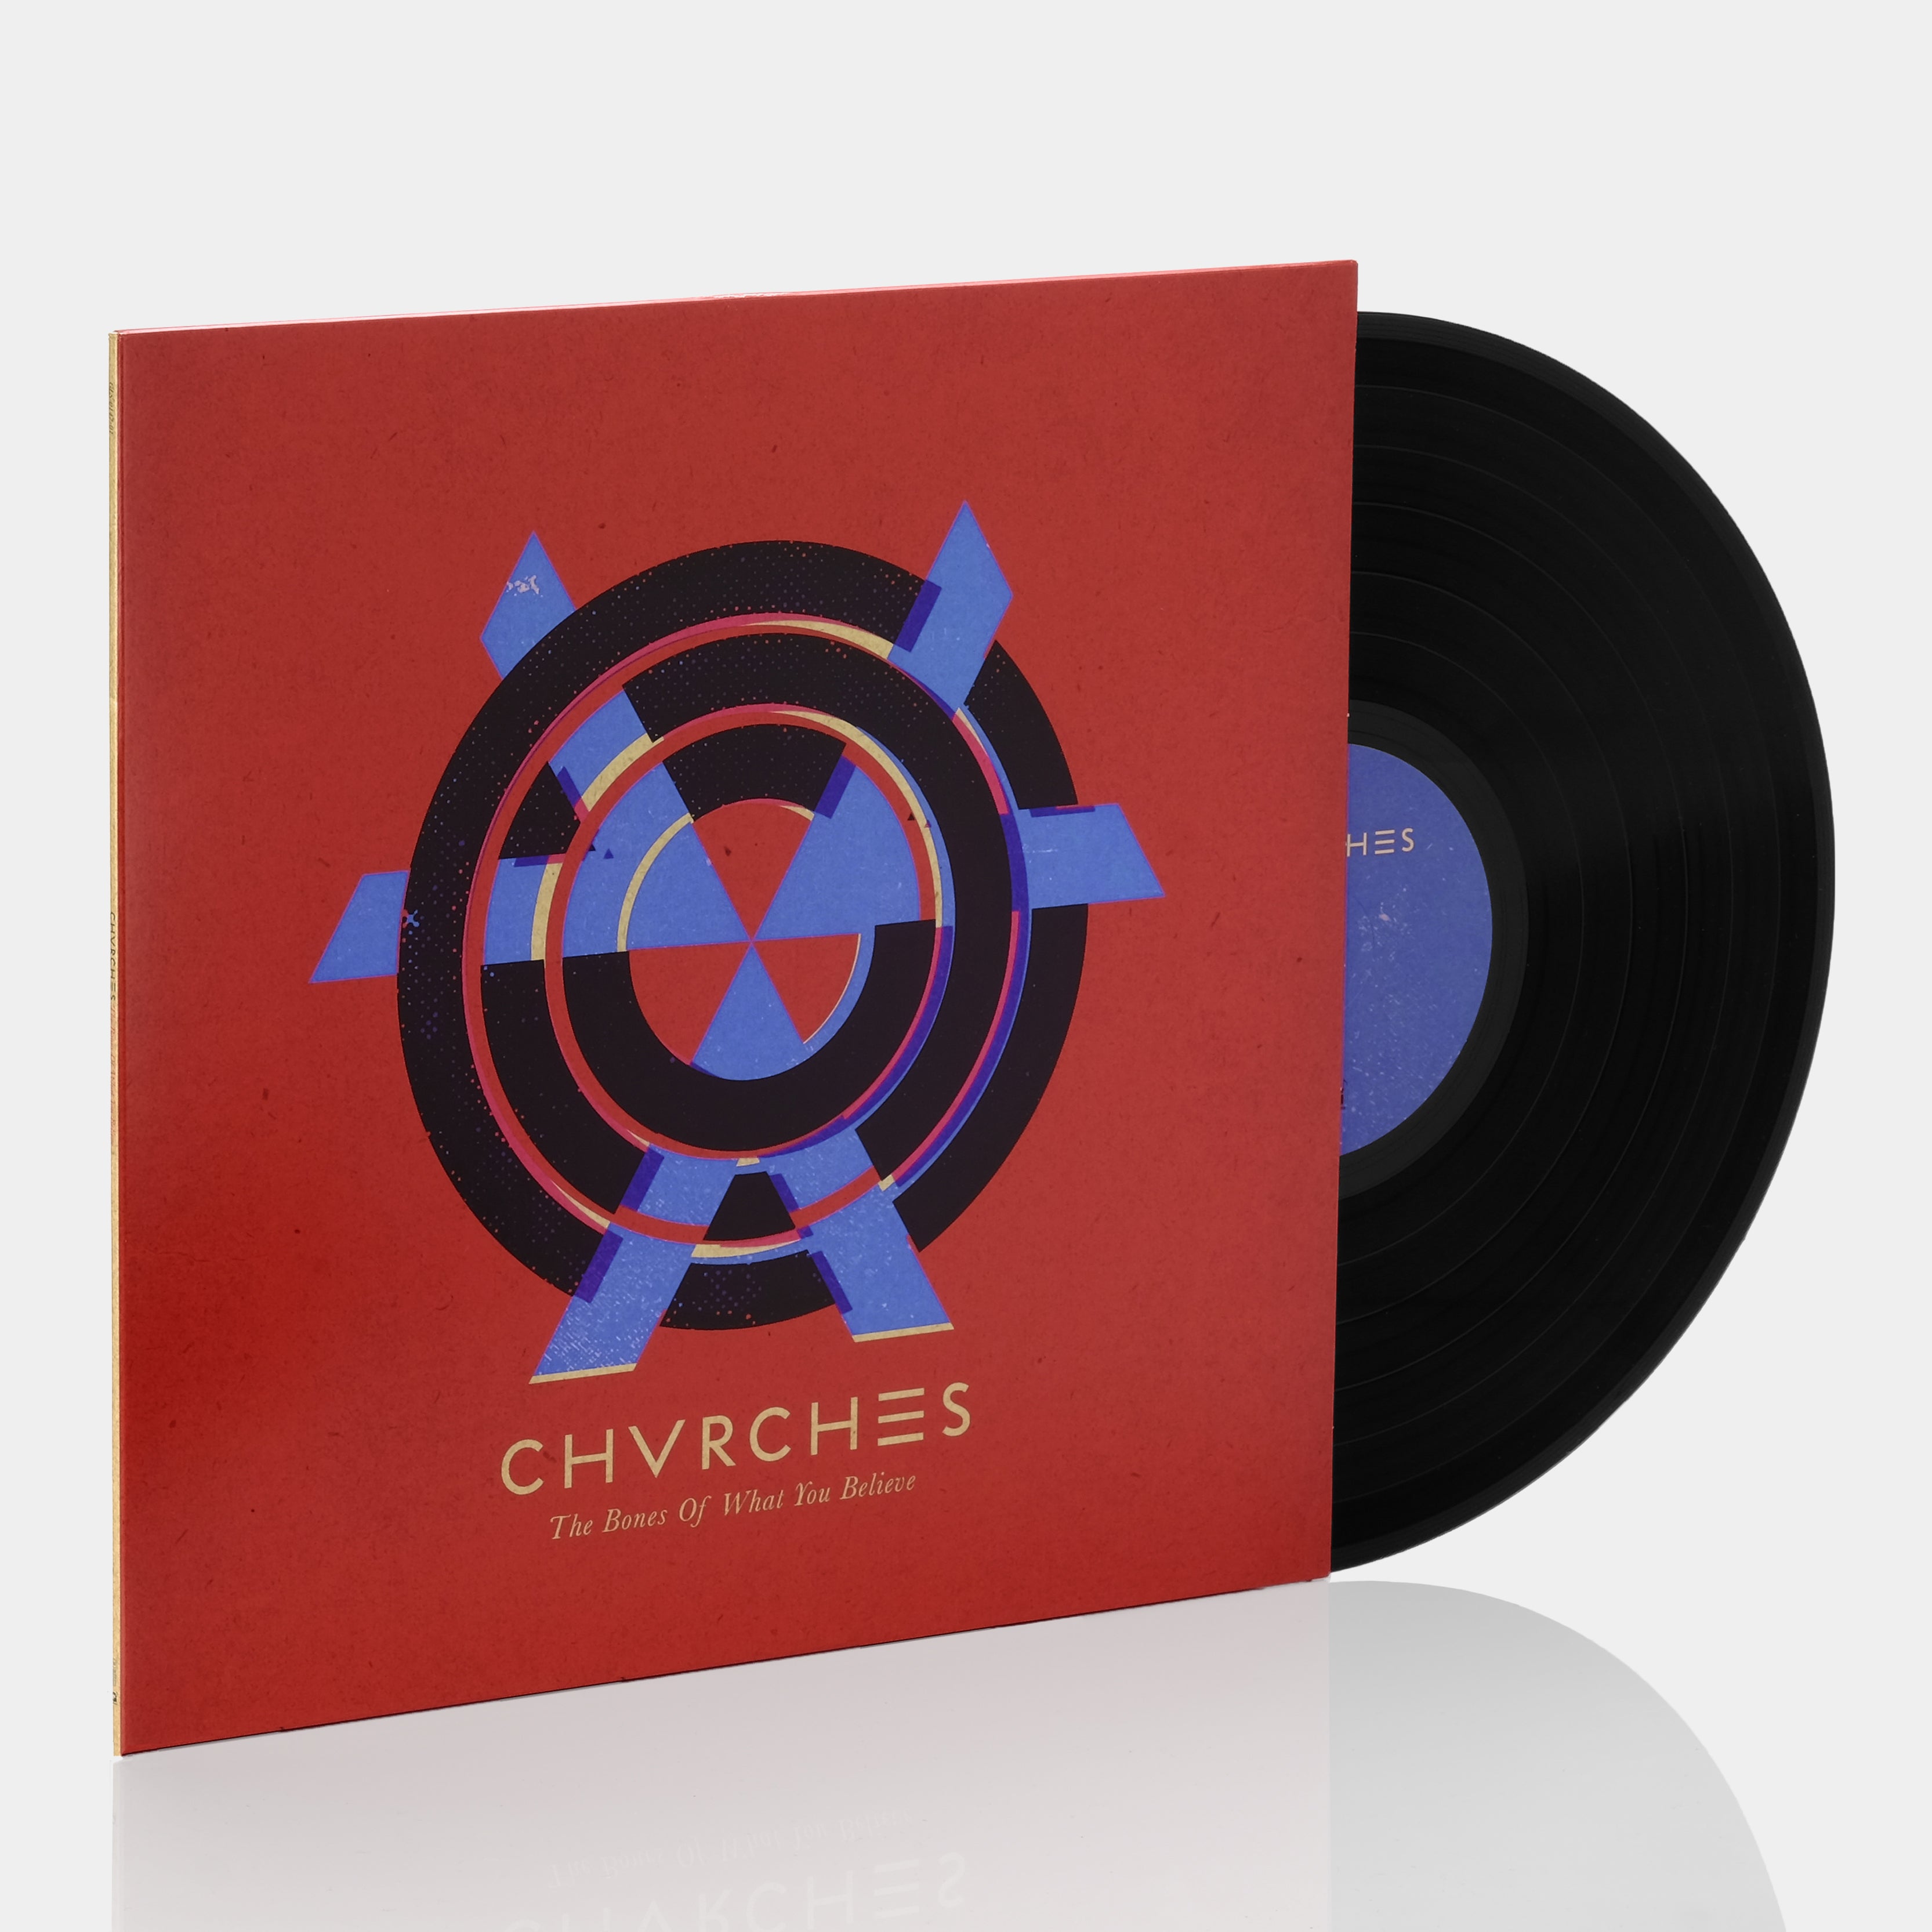 Chvrches - The Bones Of What You Believe LP Vinyl Record